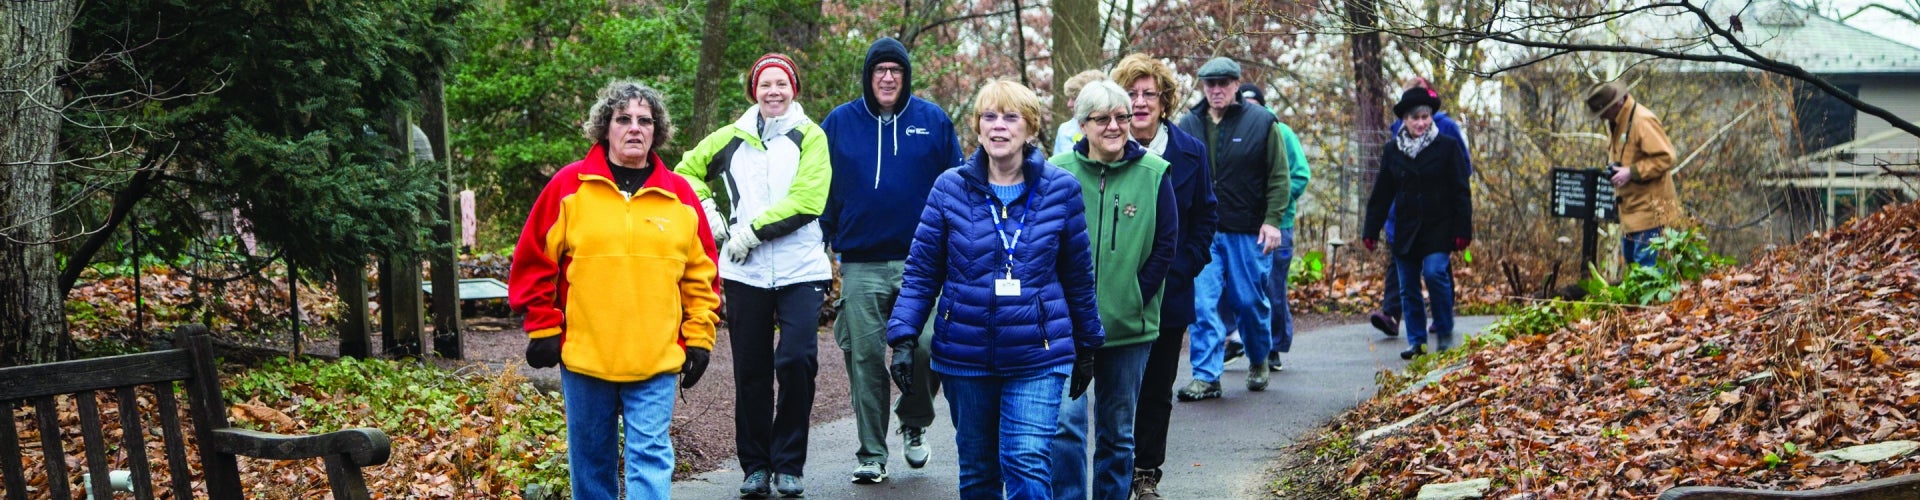 A group of people wearing winter coats walk along a paved wooded path.